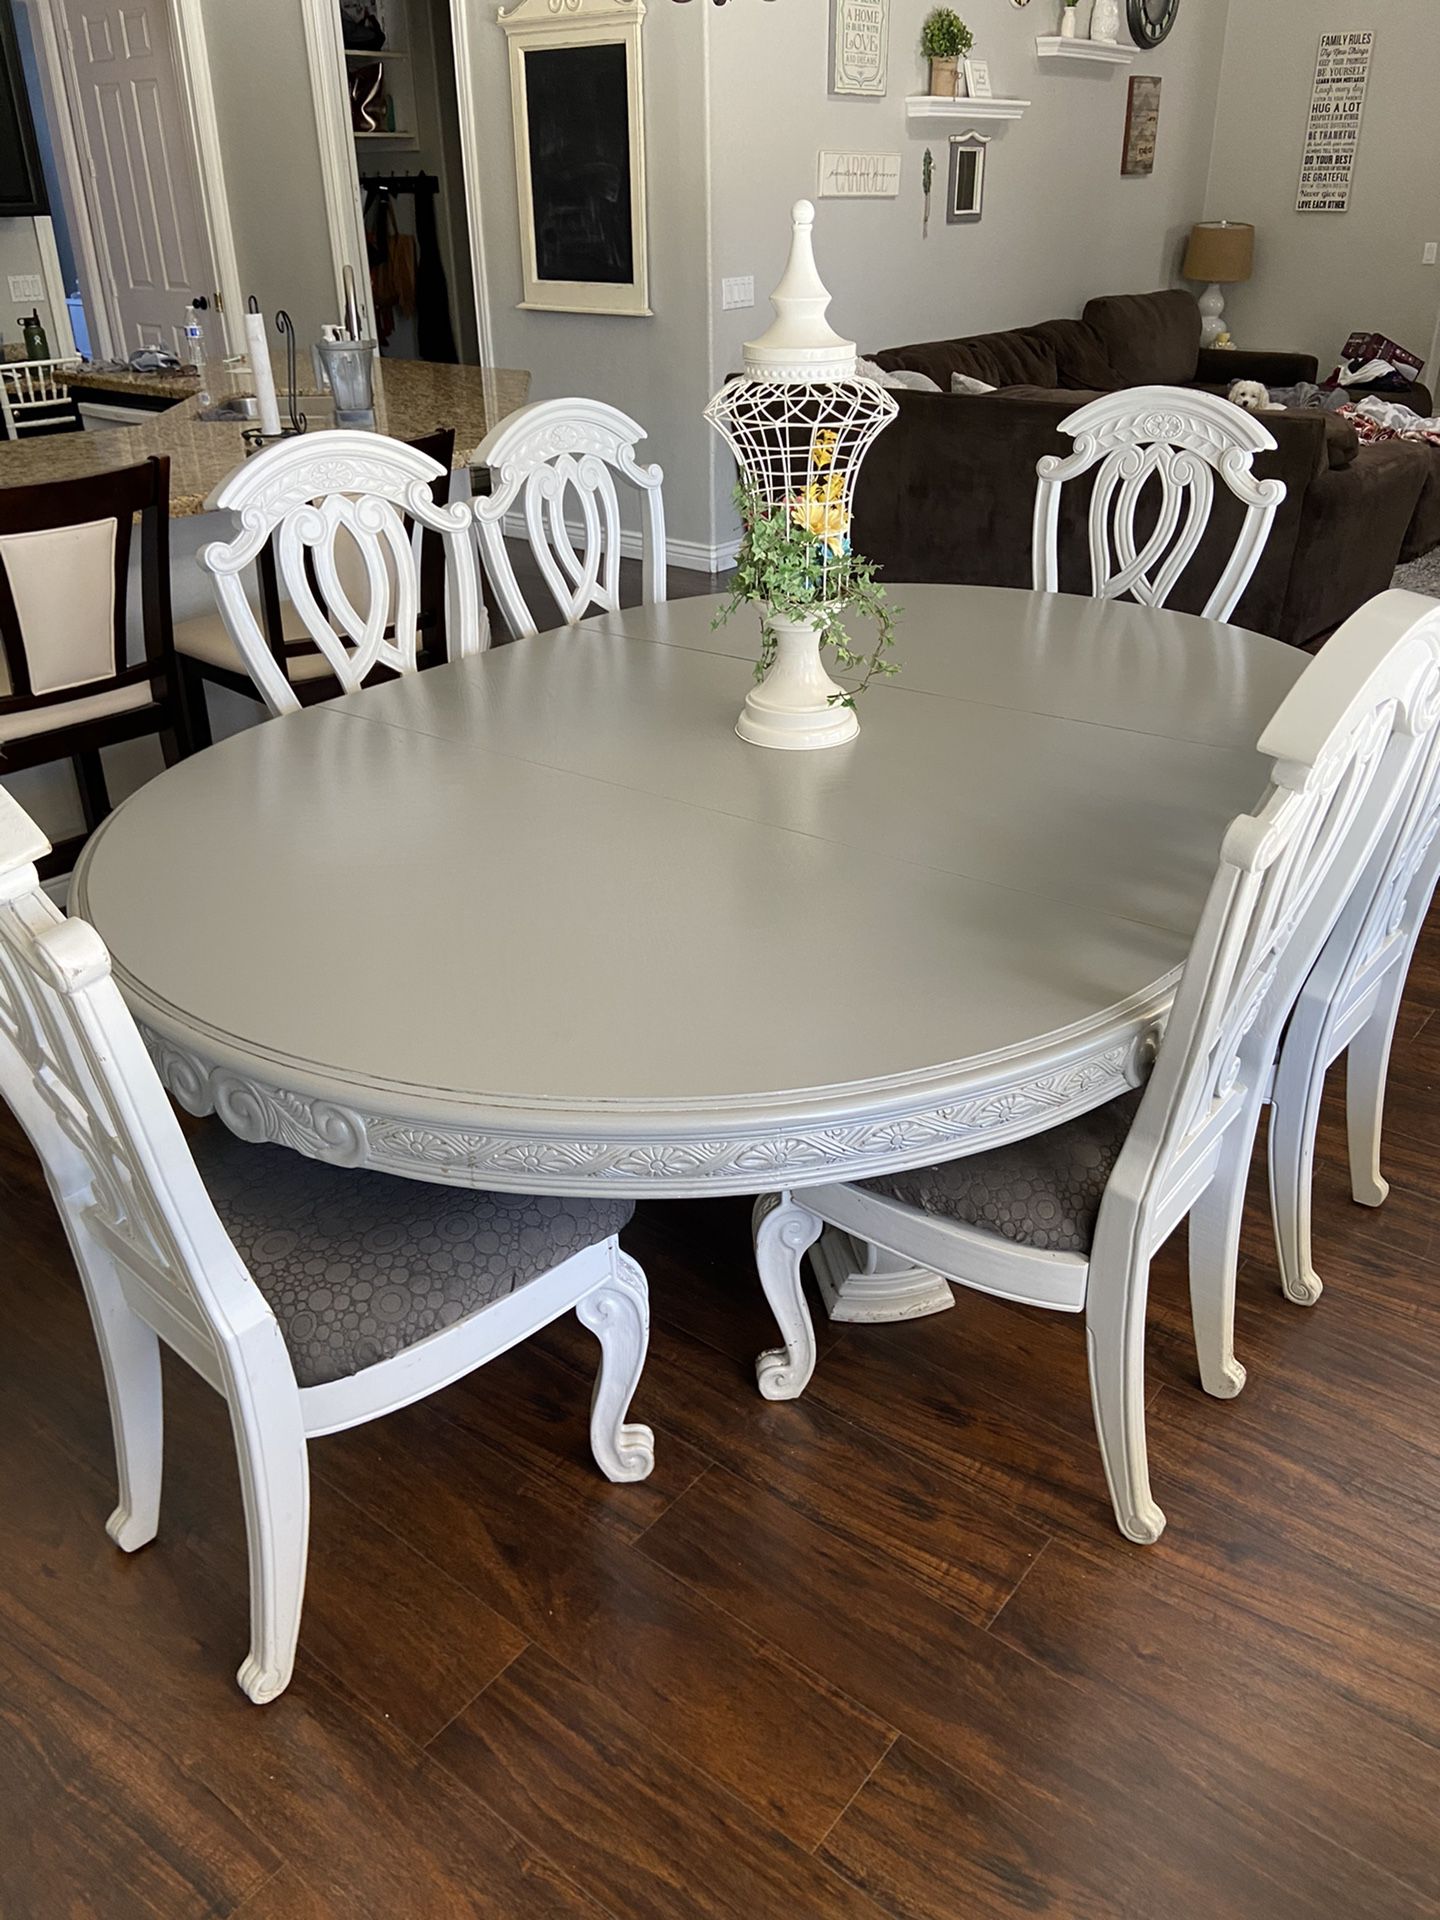 Gray oval kitchen table